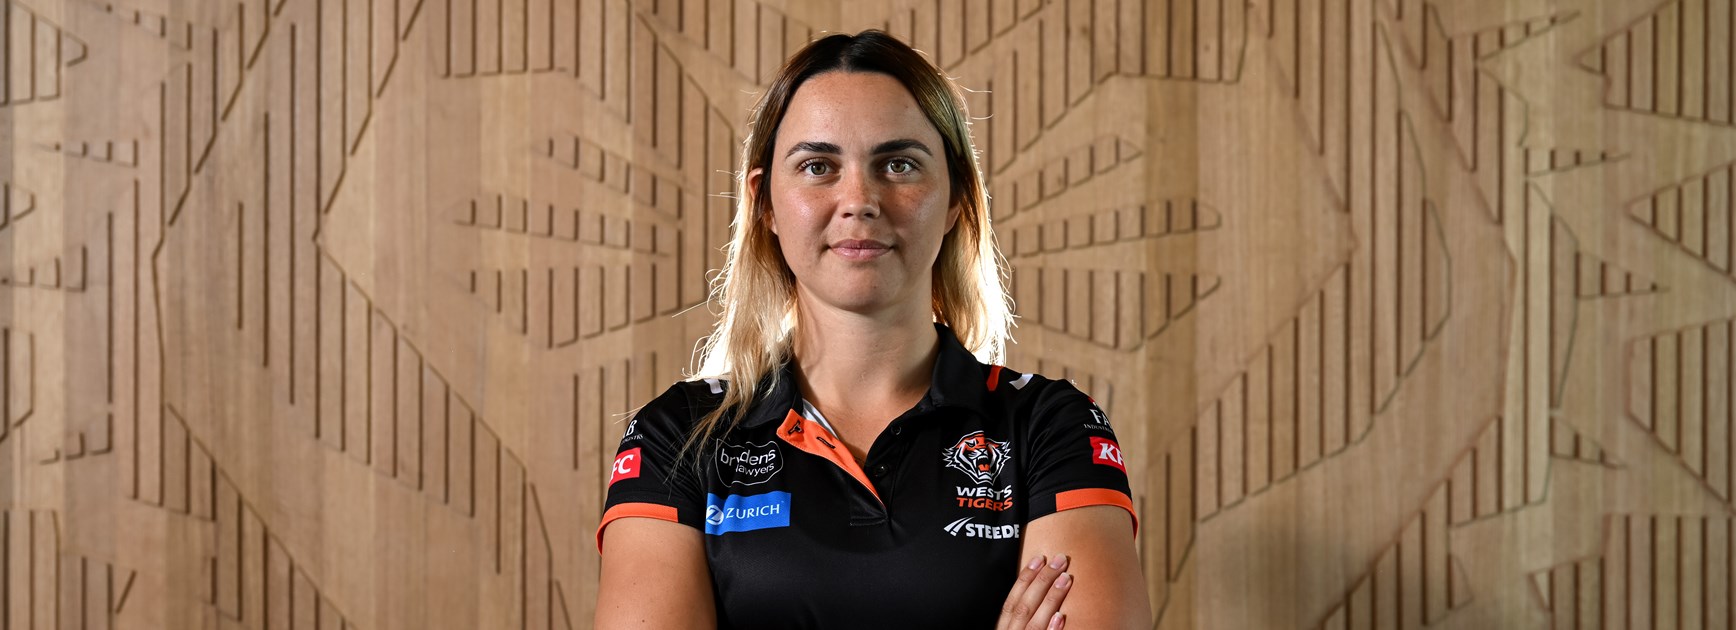 Patience, passion pays off for Wests Tigers pioneer ahead of NRLW return